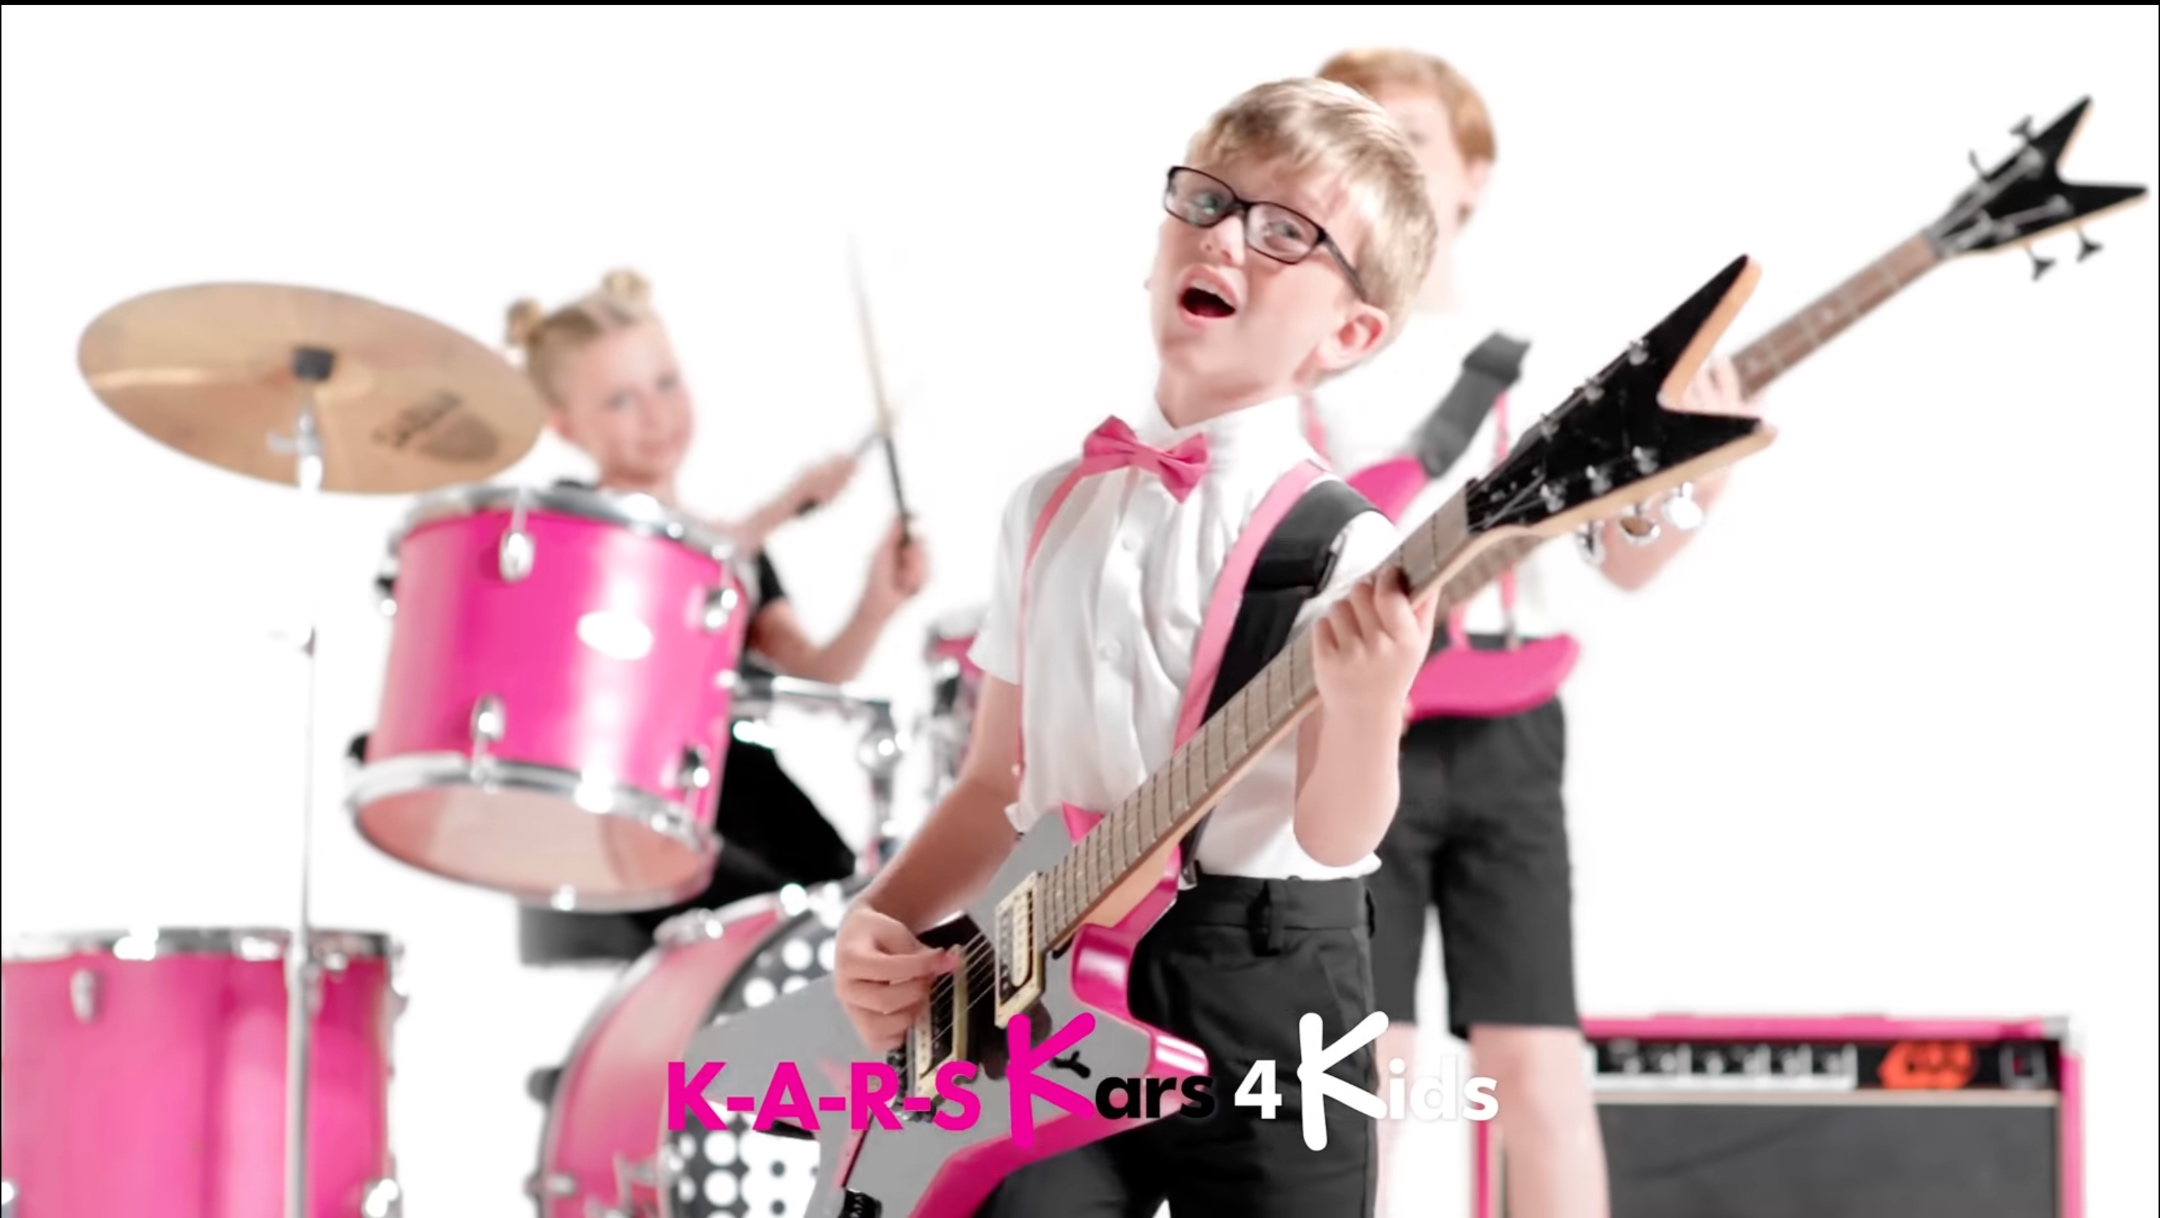 Screenshot from an ad for Kars4Kids. (YouTube)